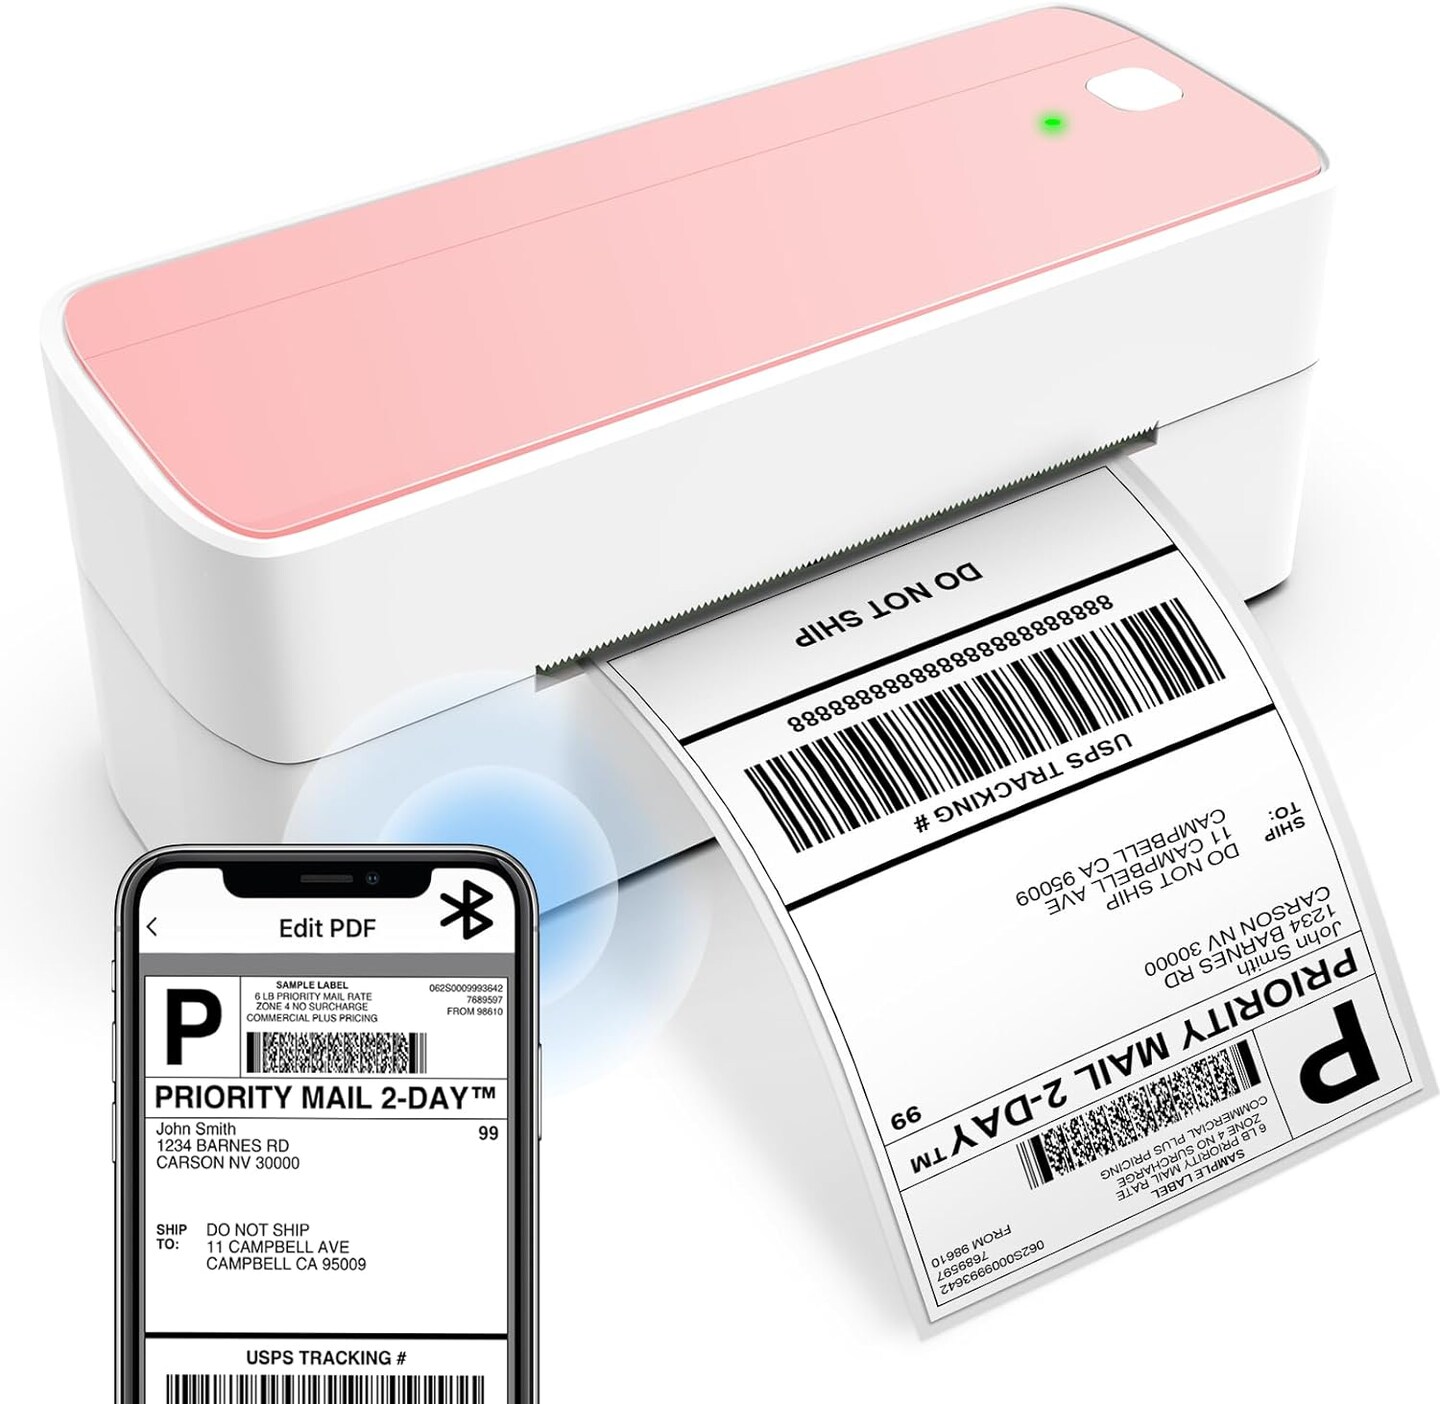 ASprink&#xAE; - Bluetooth Thermal Label Printer | 241BT - Pink Small Business and Packaging Needs